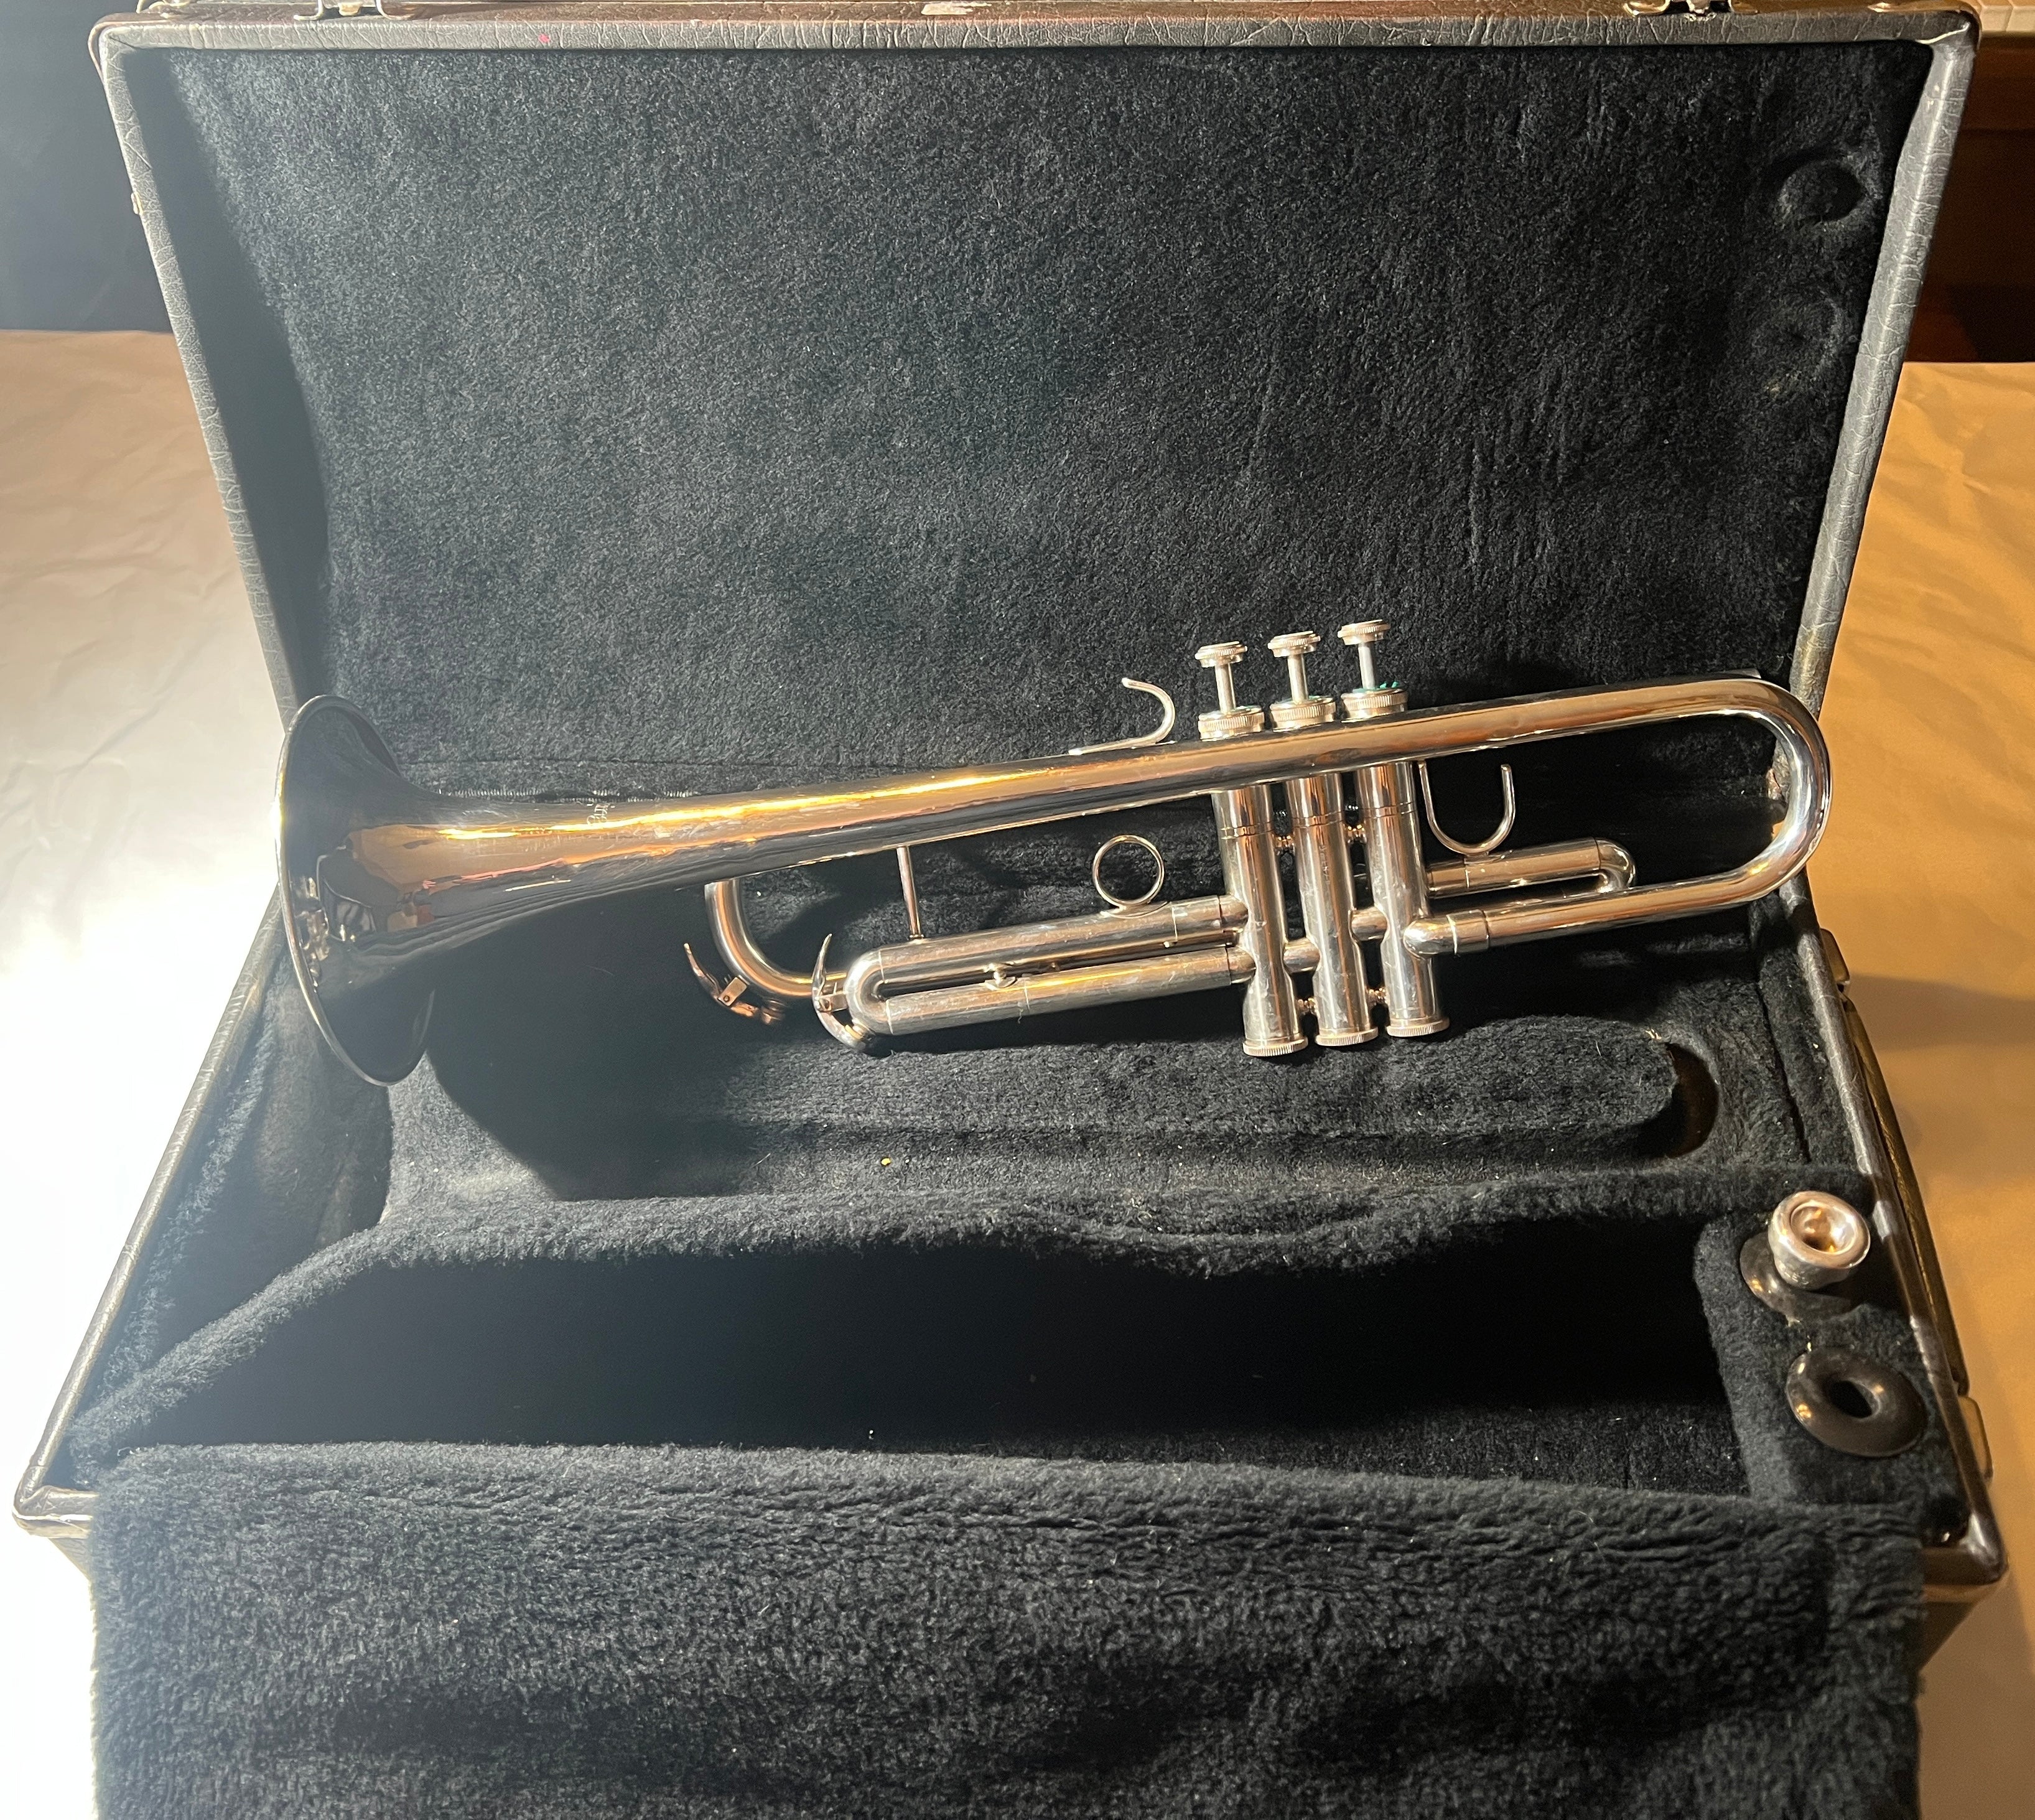 Blessing USA Trumpet Silver Professional Made in Elkhart IN  USED